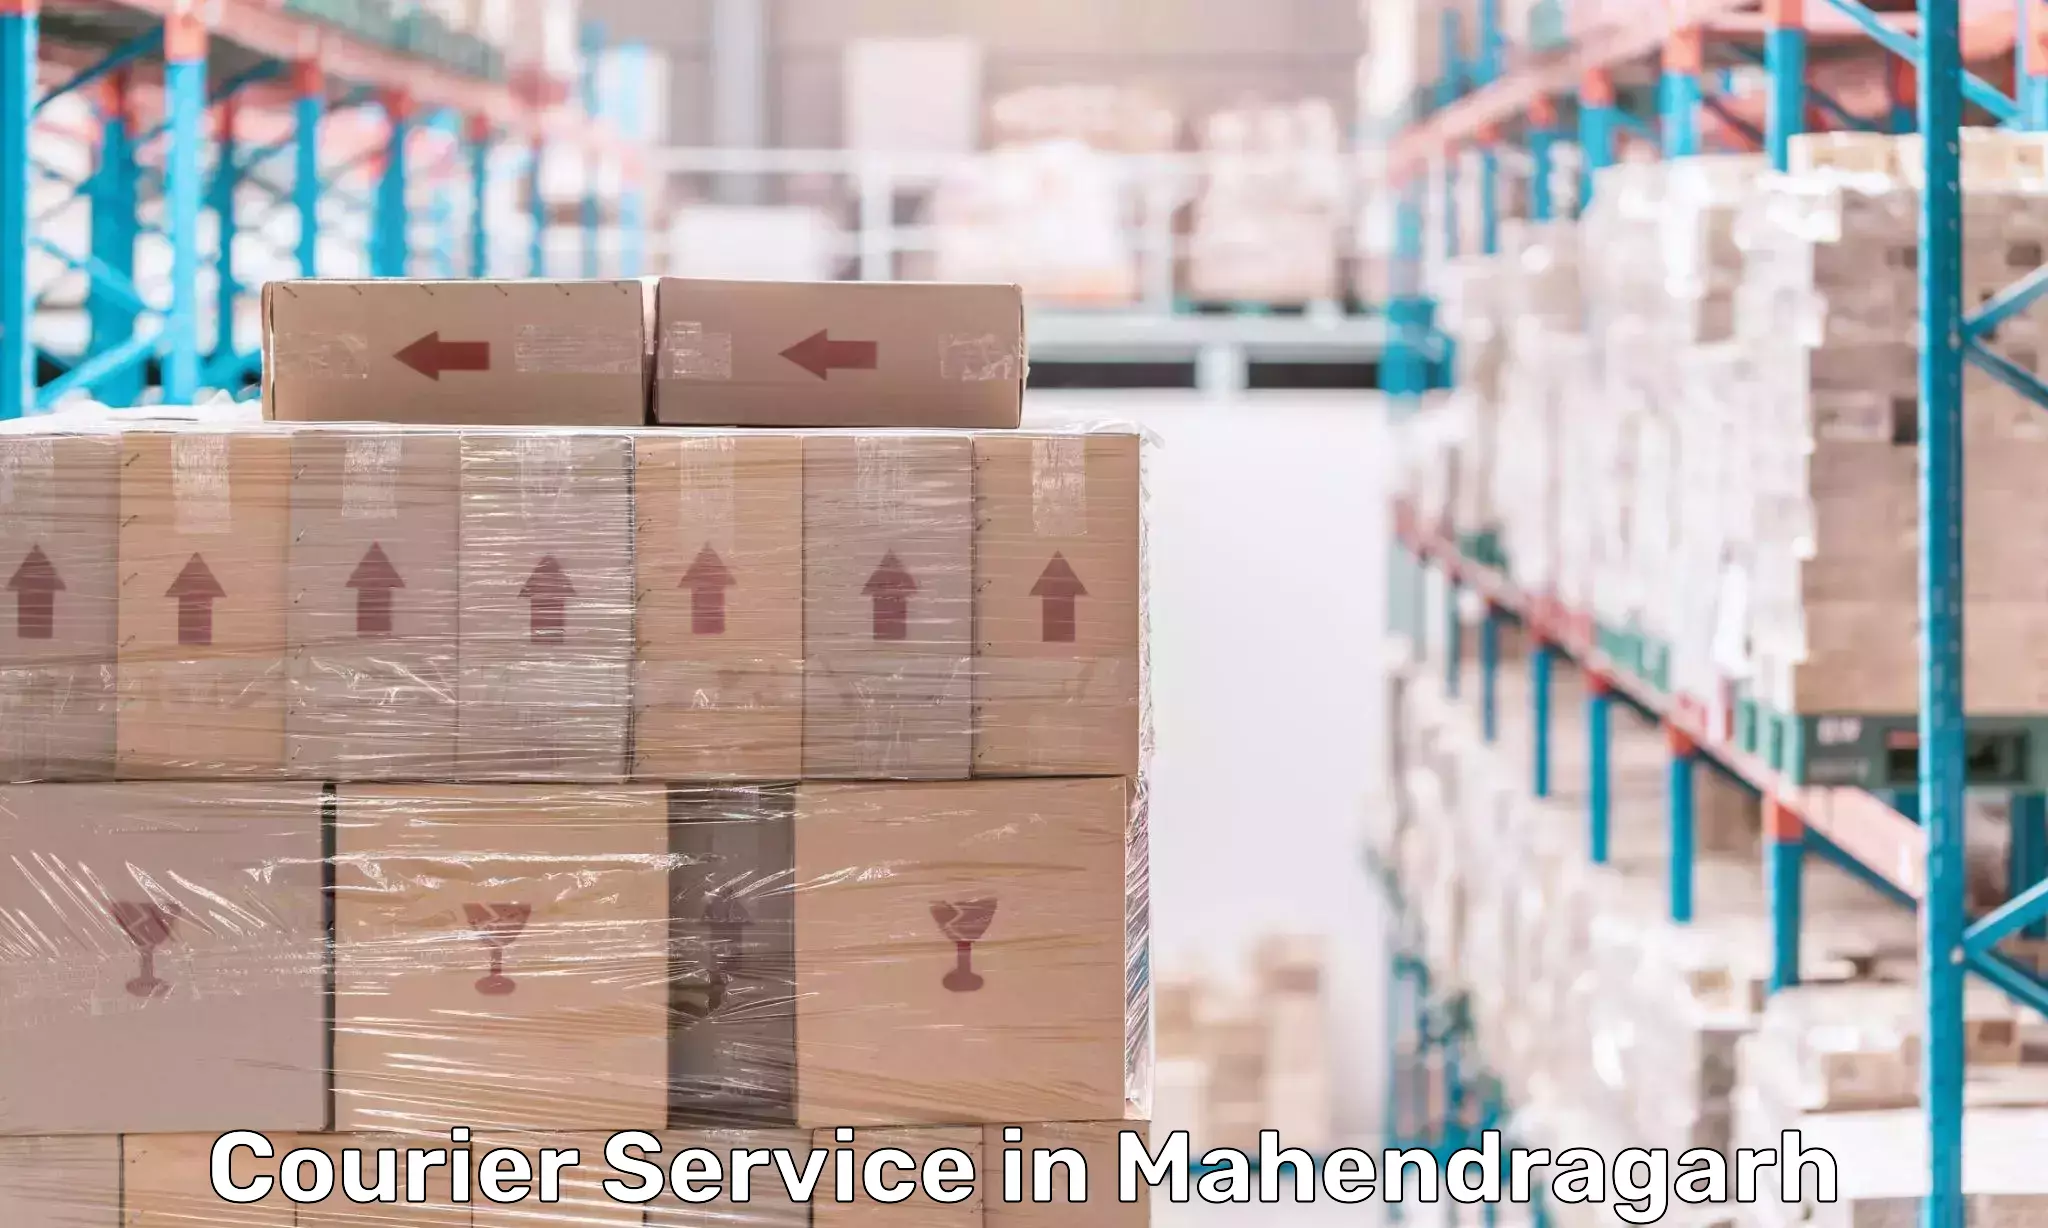 Multi-carrier shipping in Mahendragarh